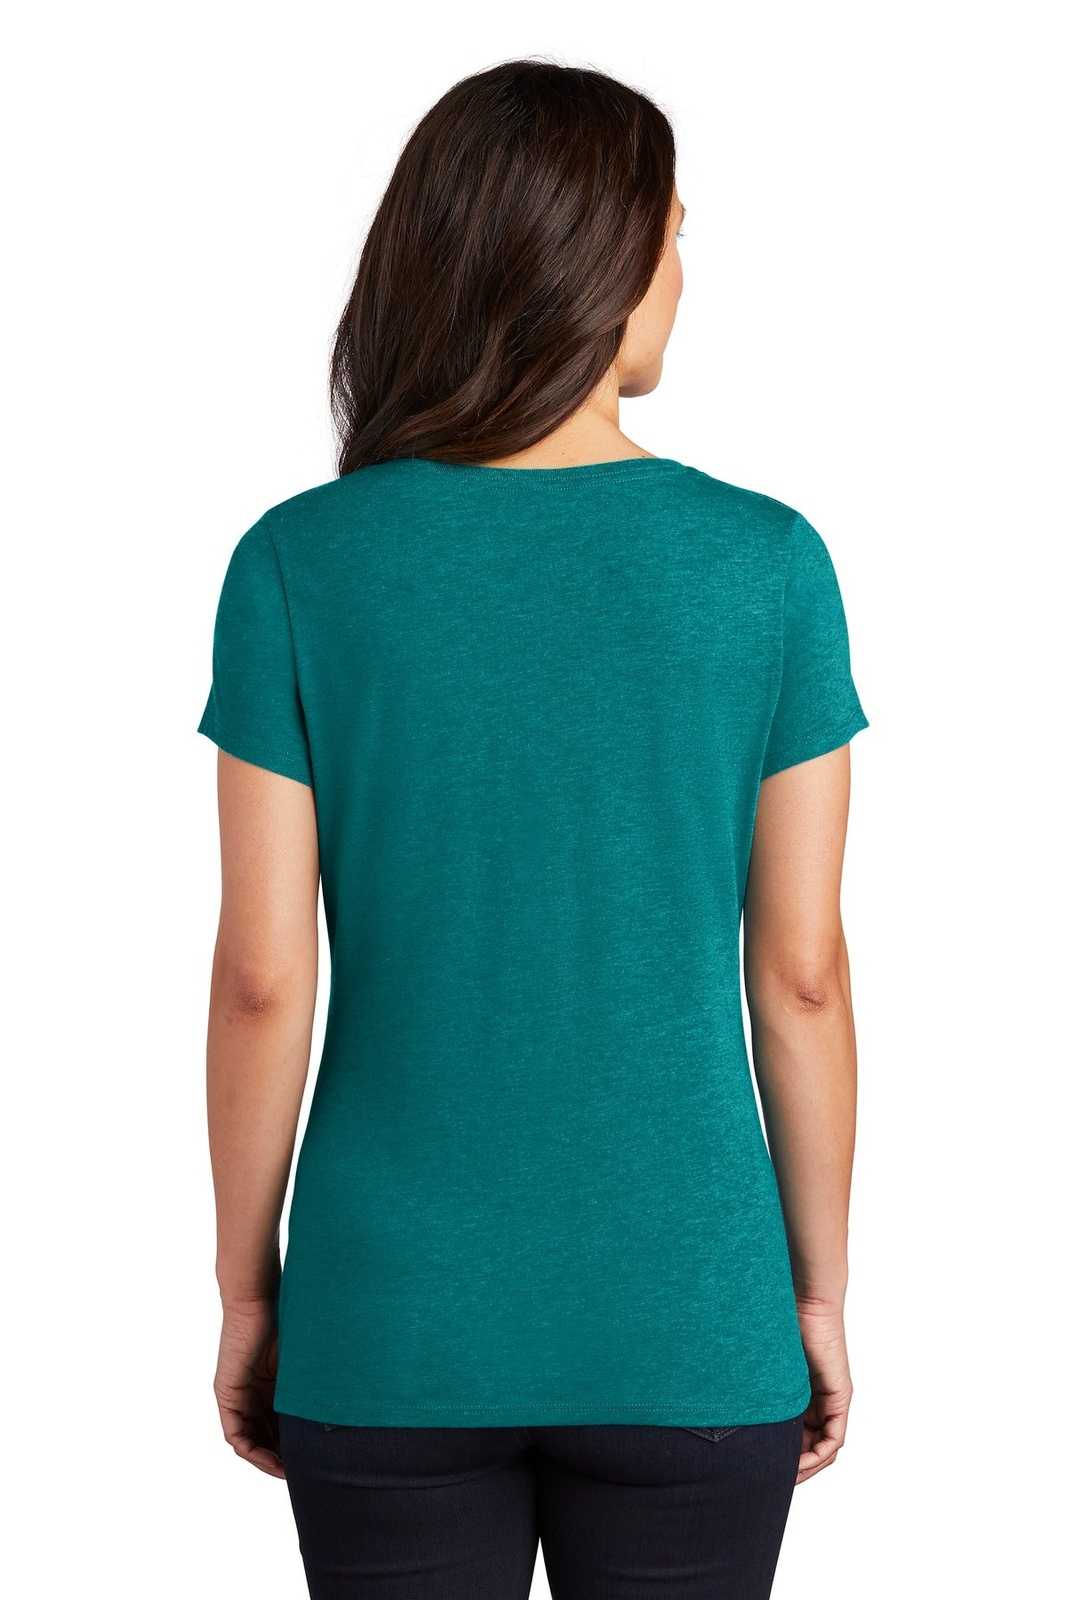 District DM1350L Women's Perfect Tri V-Neck Tee - Heathered Teal - HIT a Double - 1